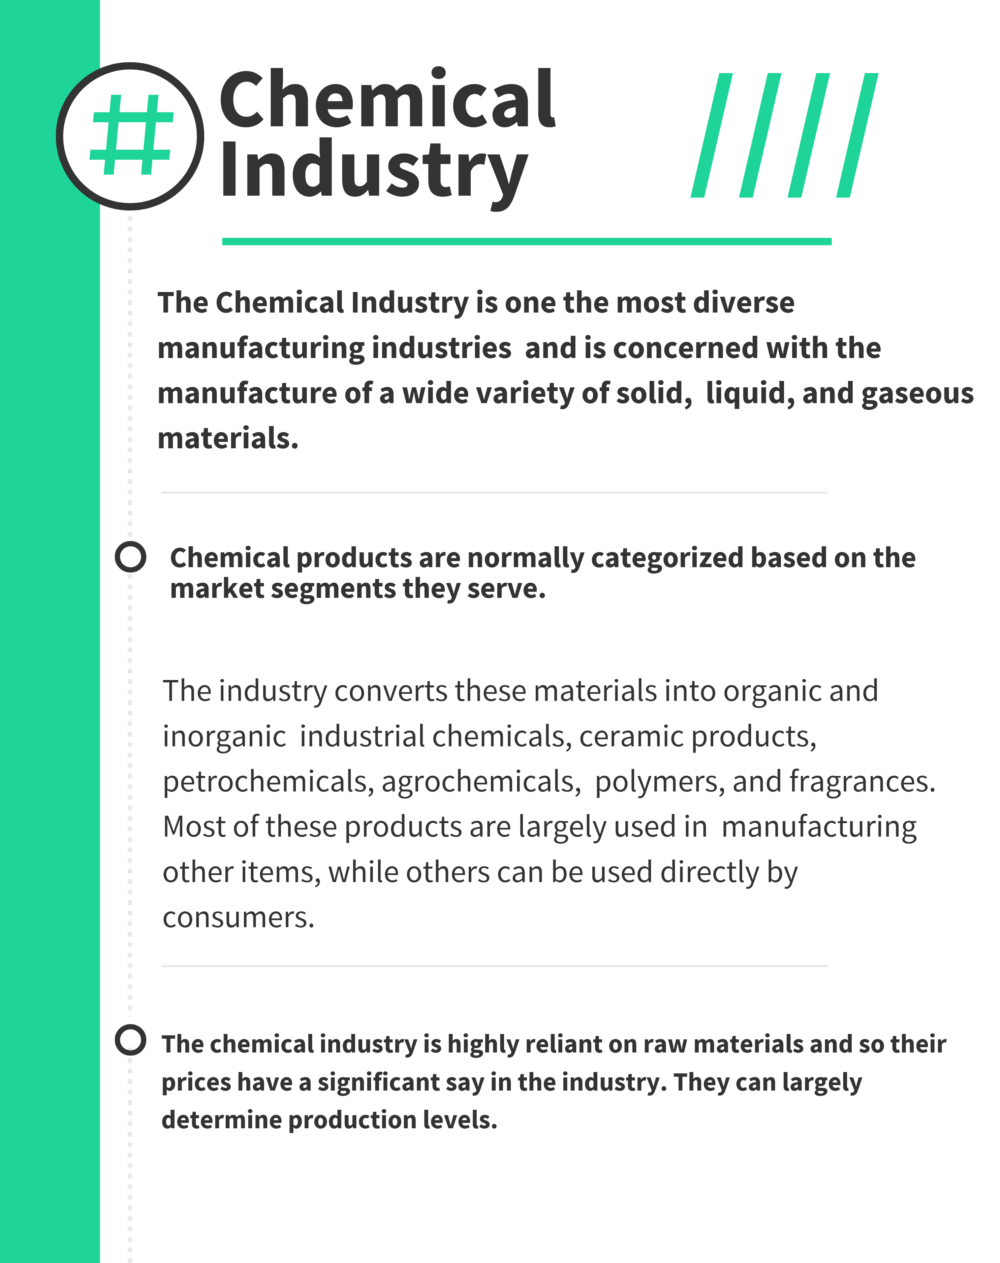 All About Chemical Industry: Key Segments and Value Chain